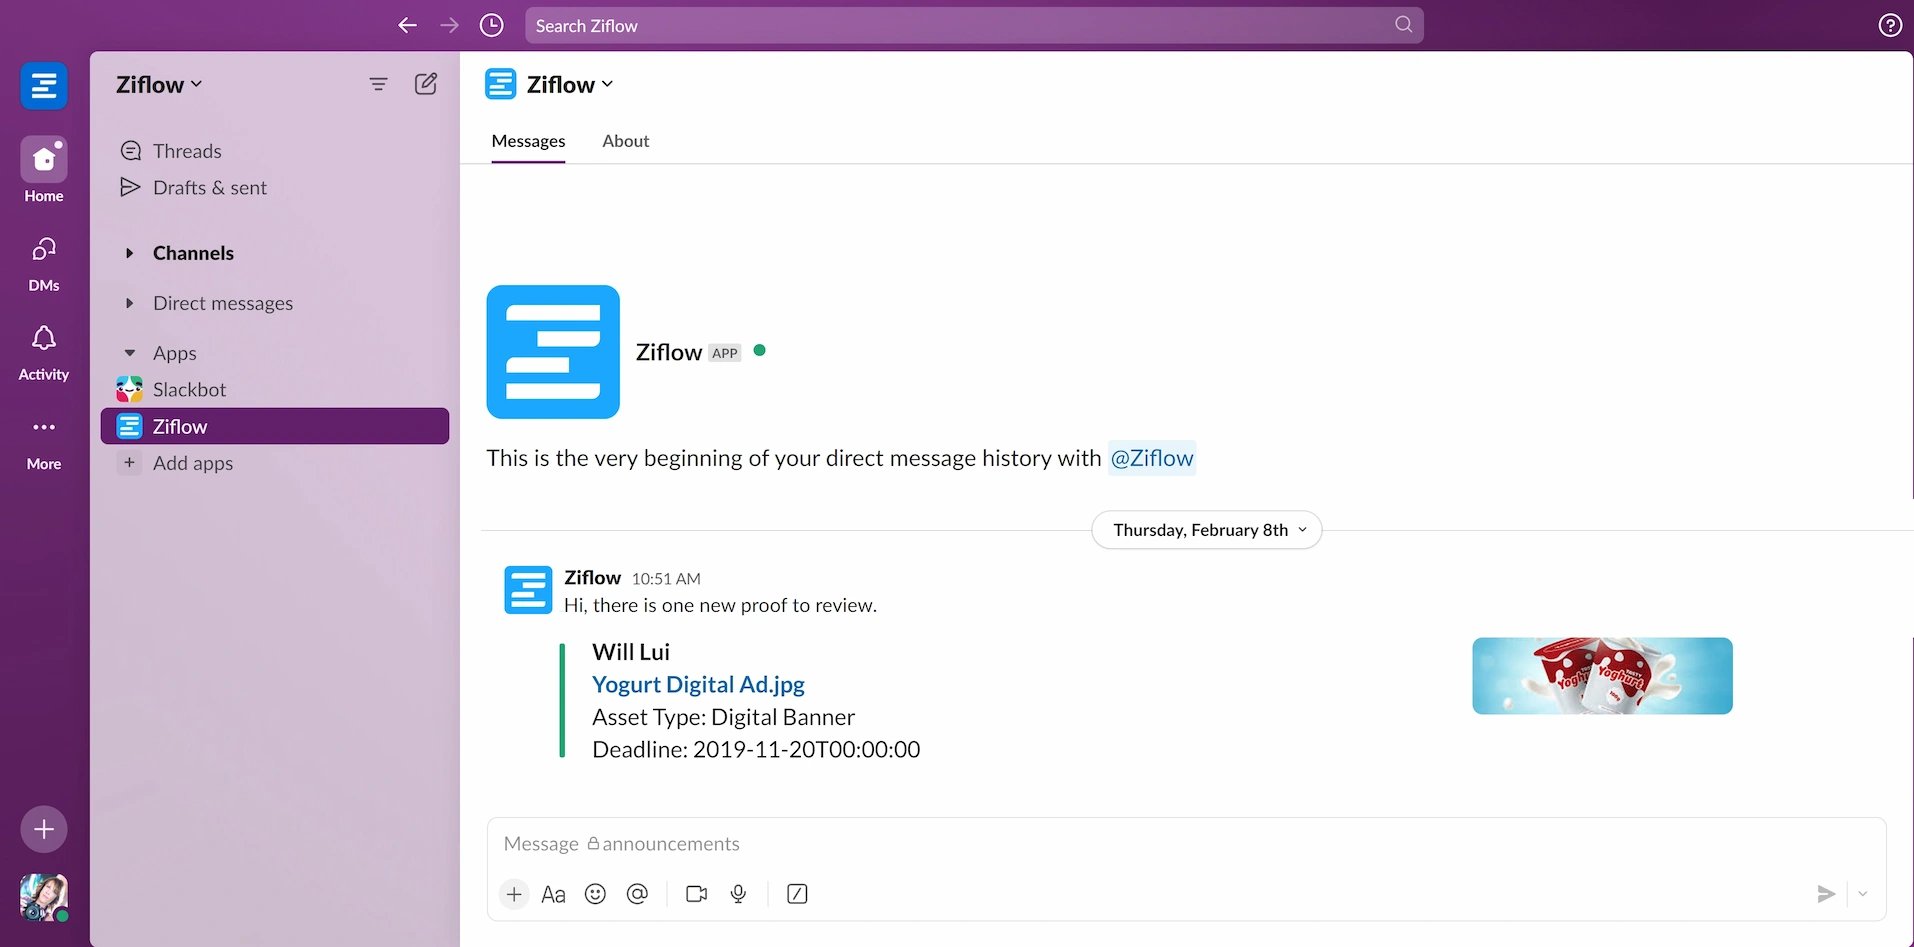 Ziflow and Slack integration - Slacks interfgace with Ziflow channel and the message 